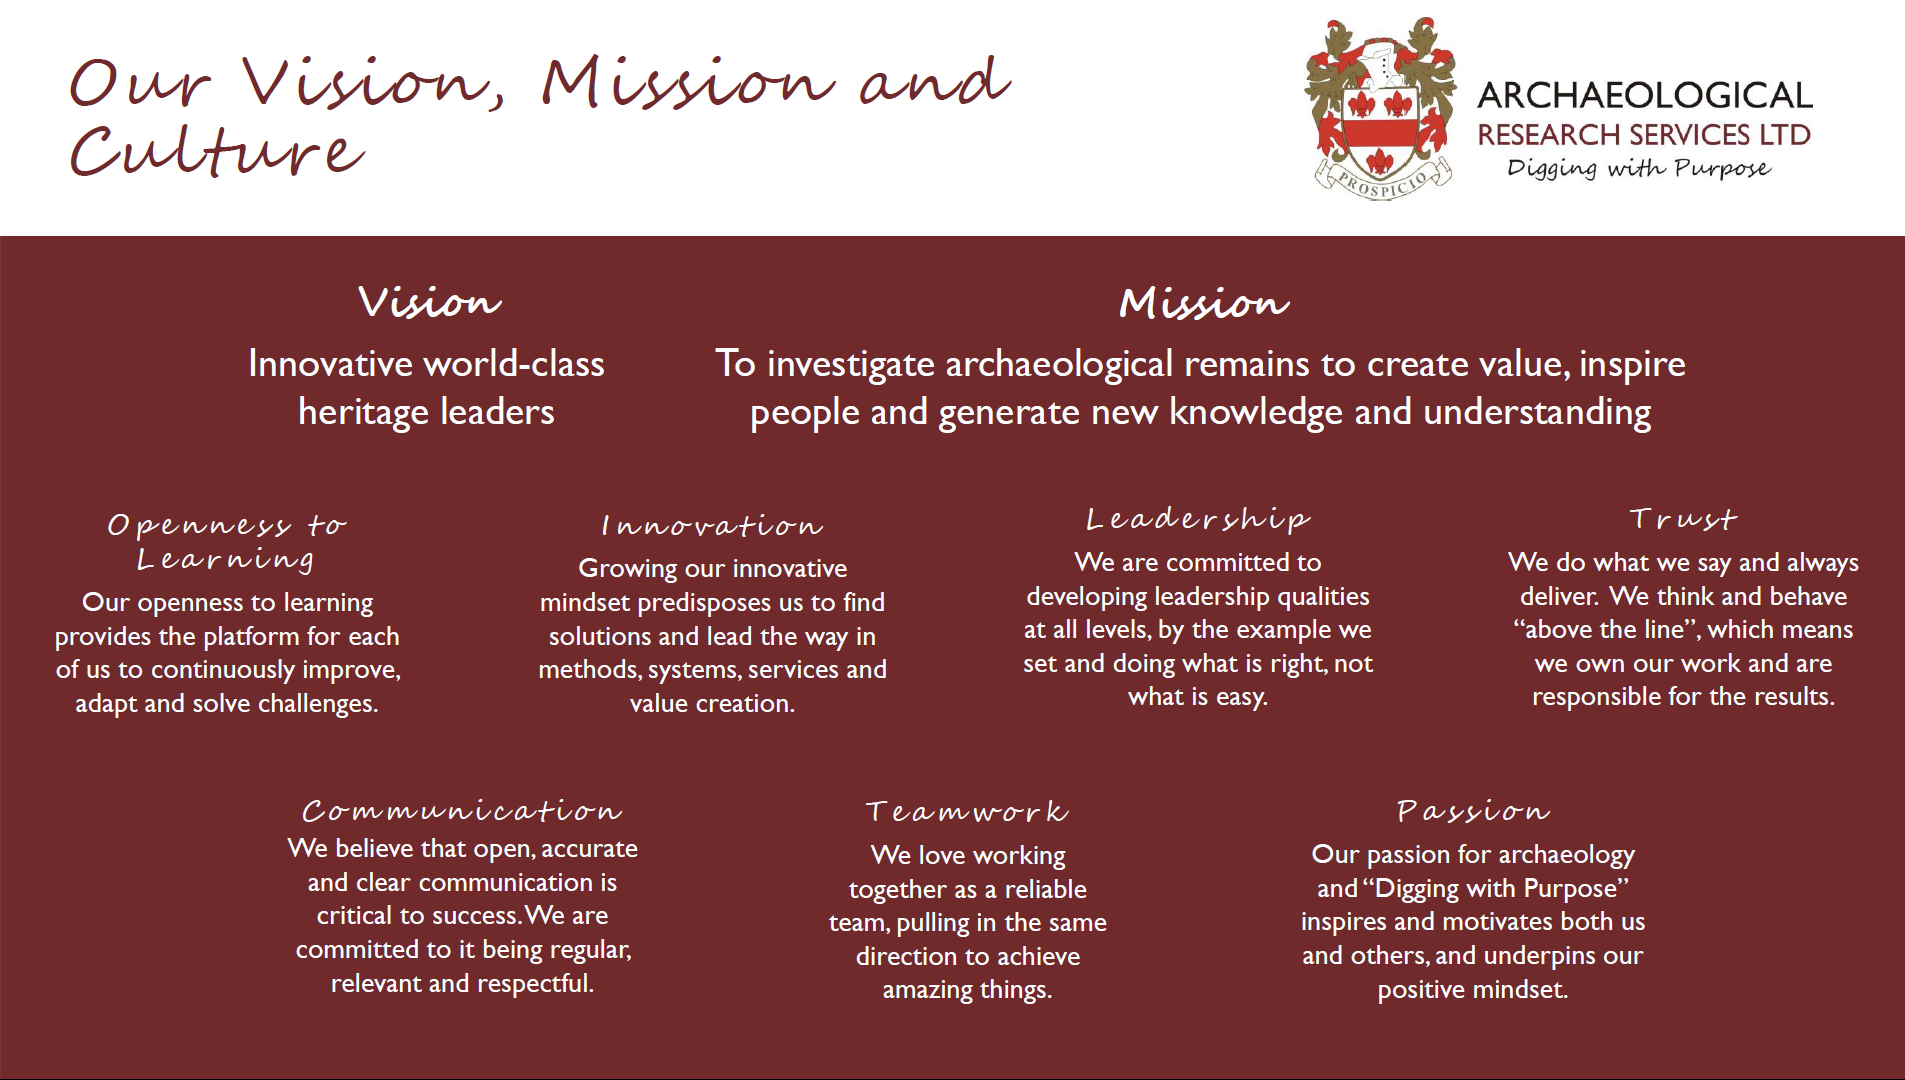 ARS Vision, Mission and Culture Statement © Copyright ARS Ltd 2022